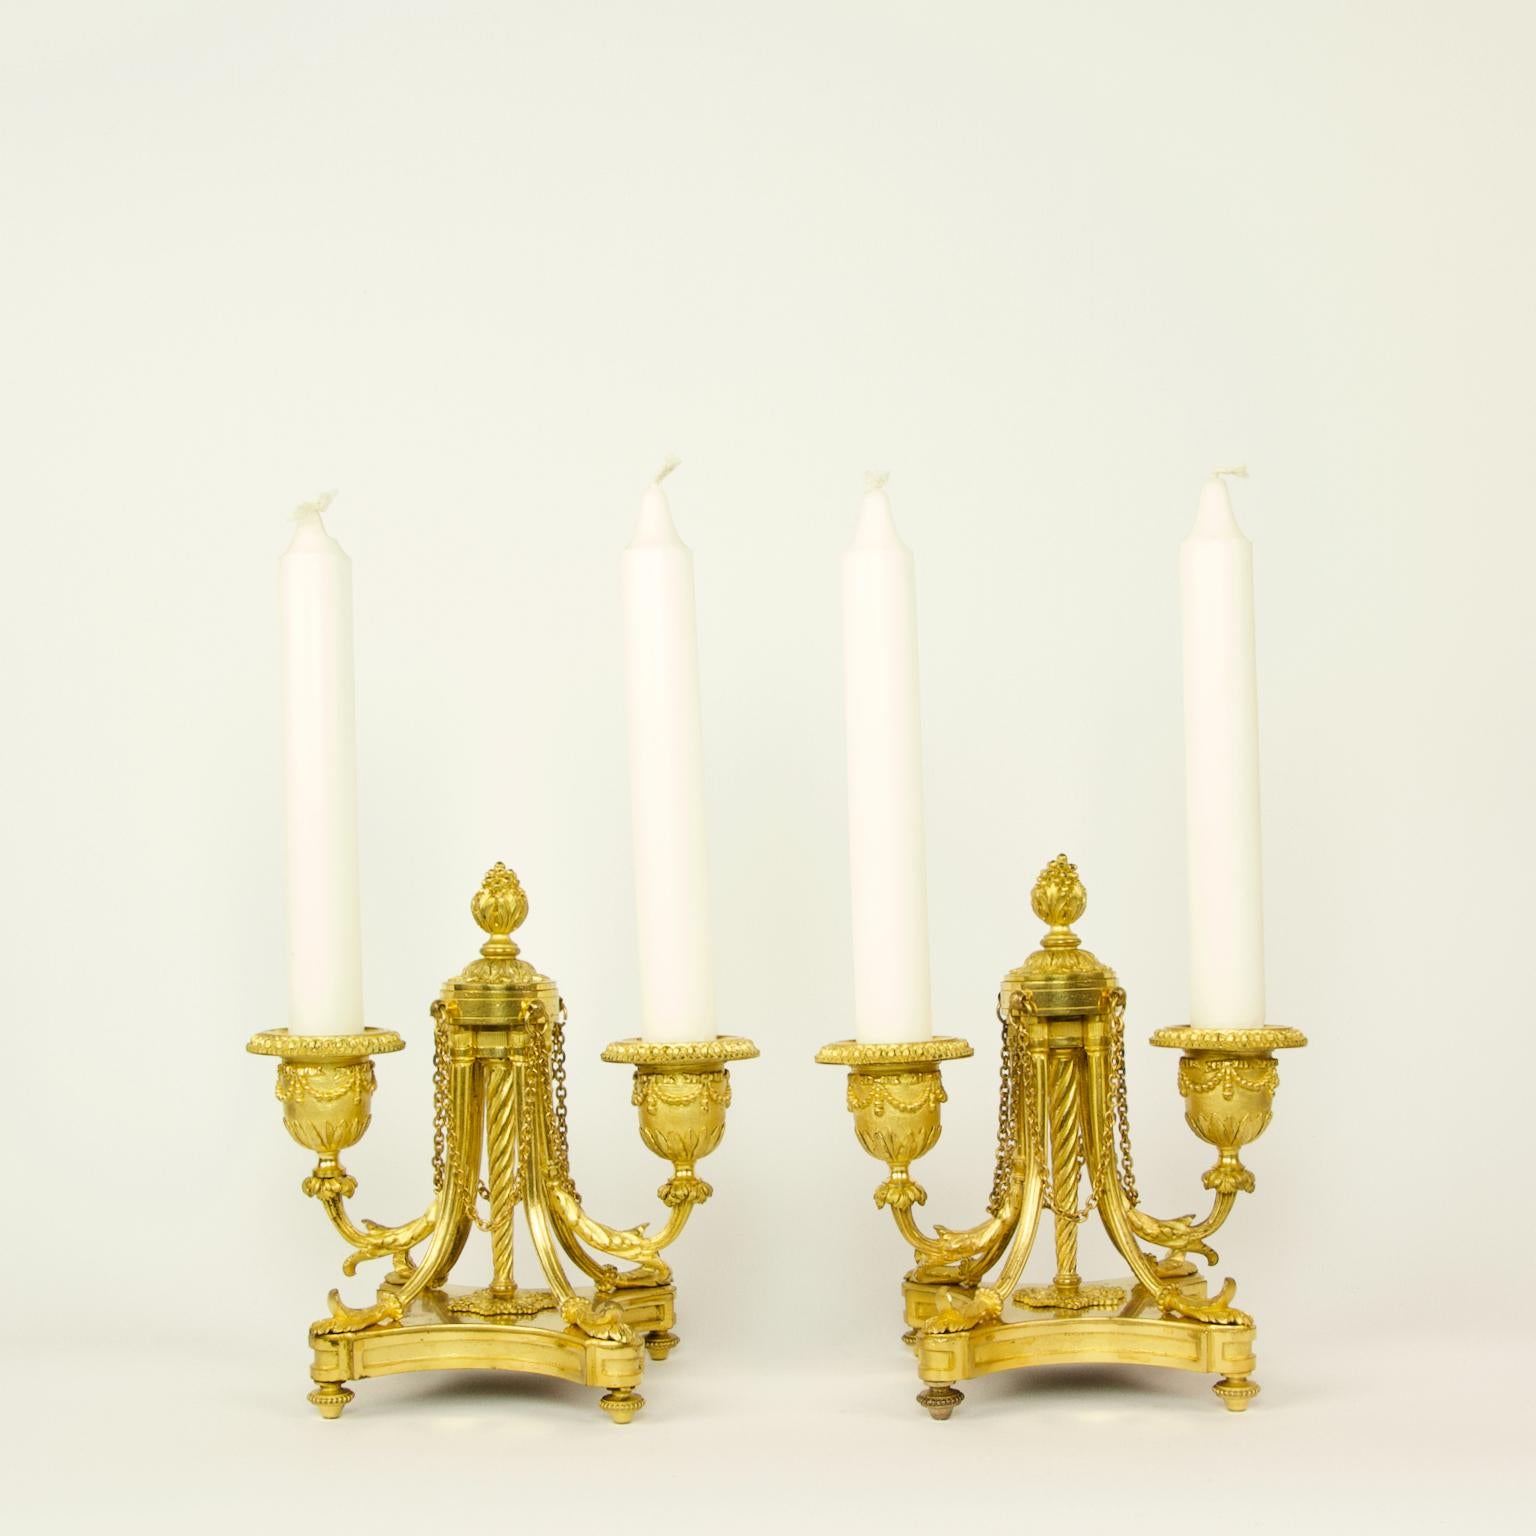 Pair of small French 19th century/Napoleon III Louis XVI style gilt bronze two-light candelabra

Each candelabra featuring two fluted light arms with foliage decoration and bell-shaped nozzles or bobeches. The light arms are supported by a